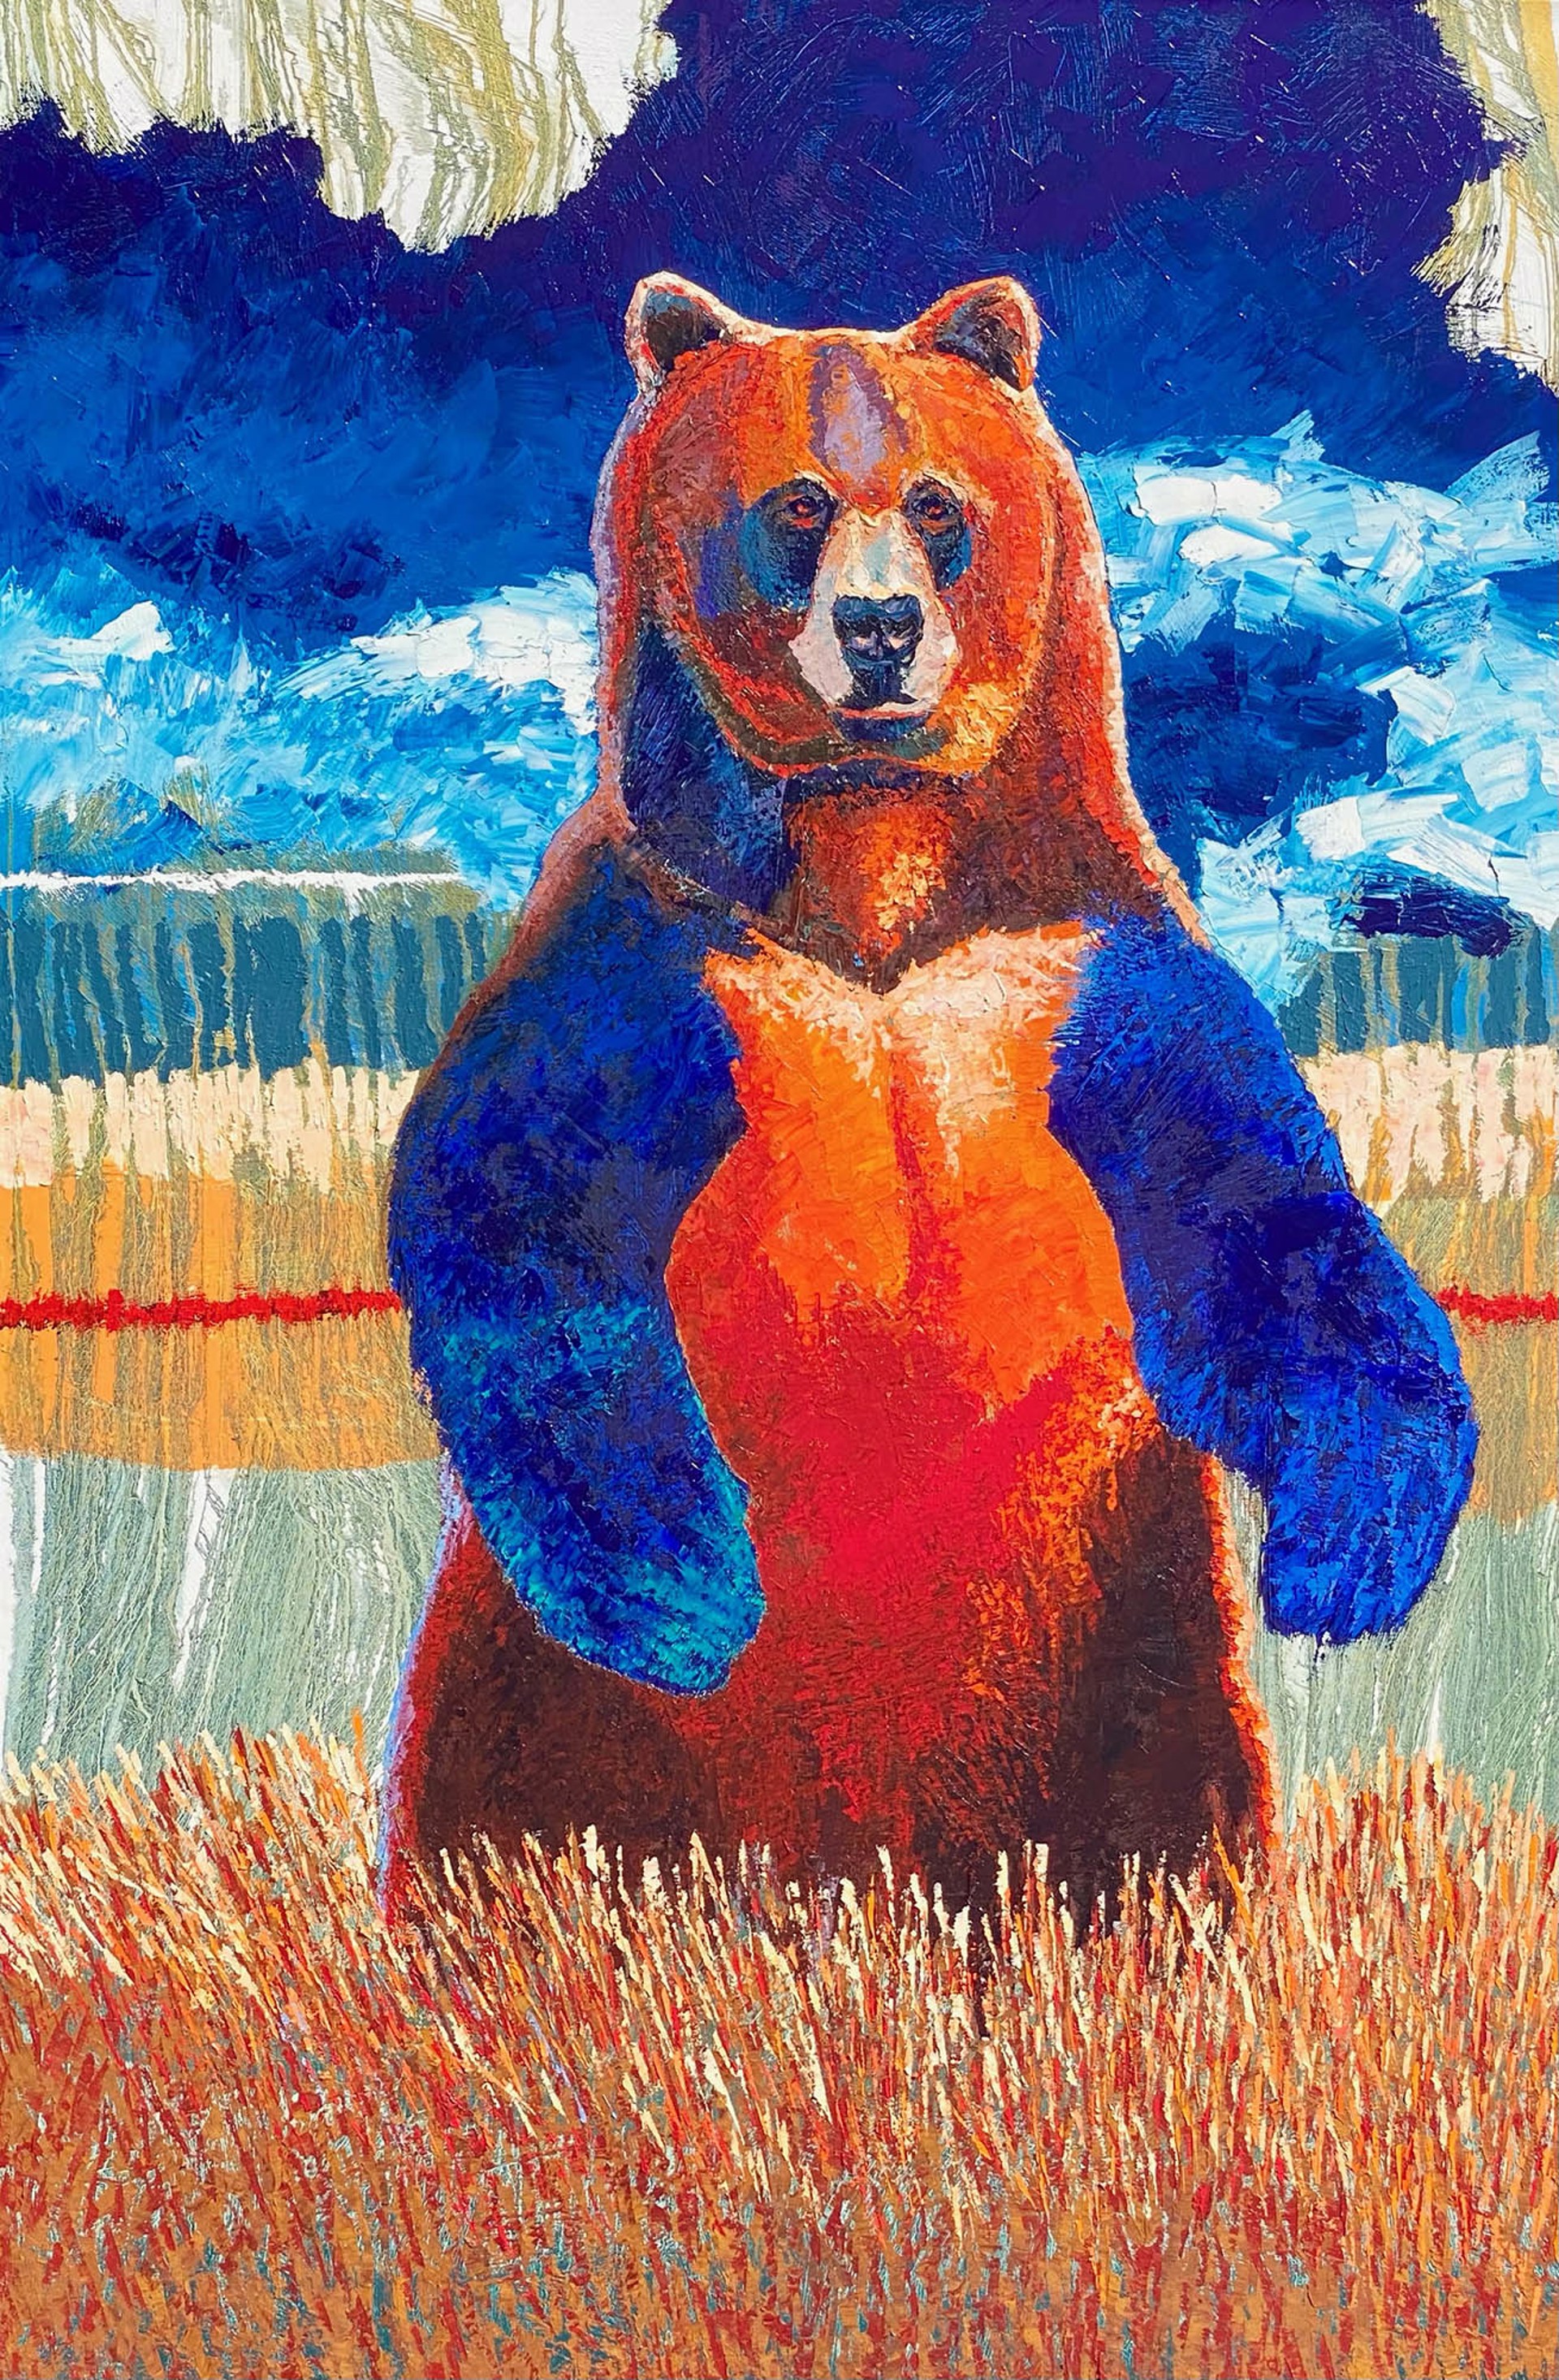 Original Oil Painting Featuring A Standing Grizzly Bear In A Color Block Graphic Style